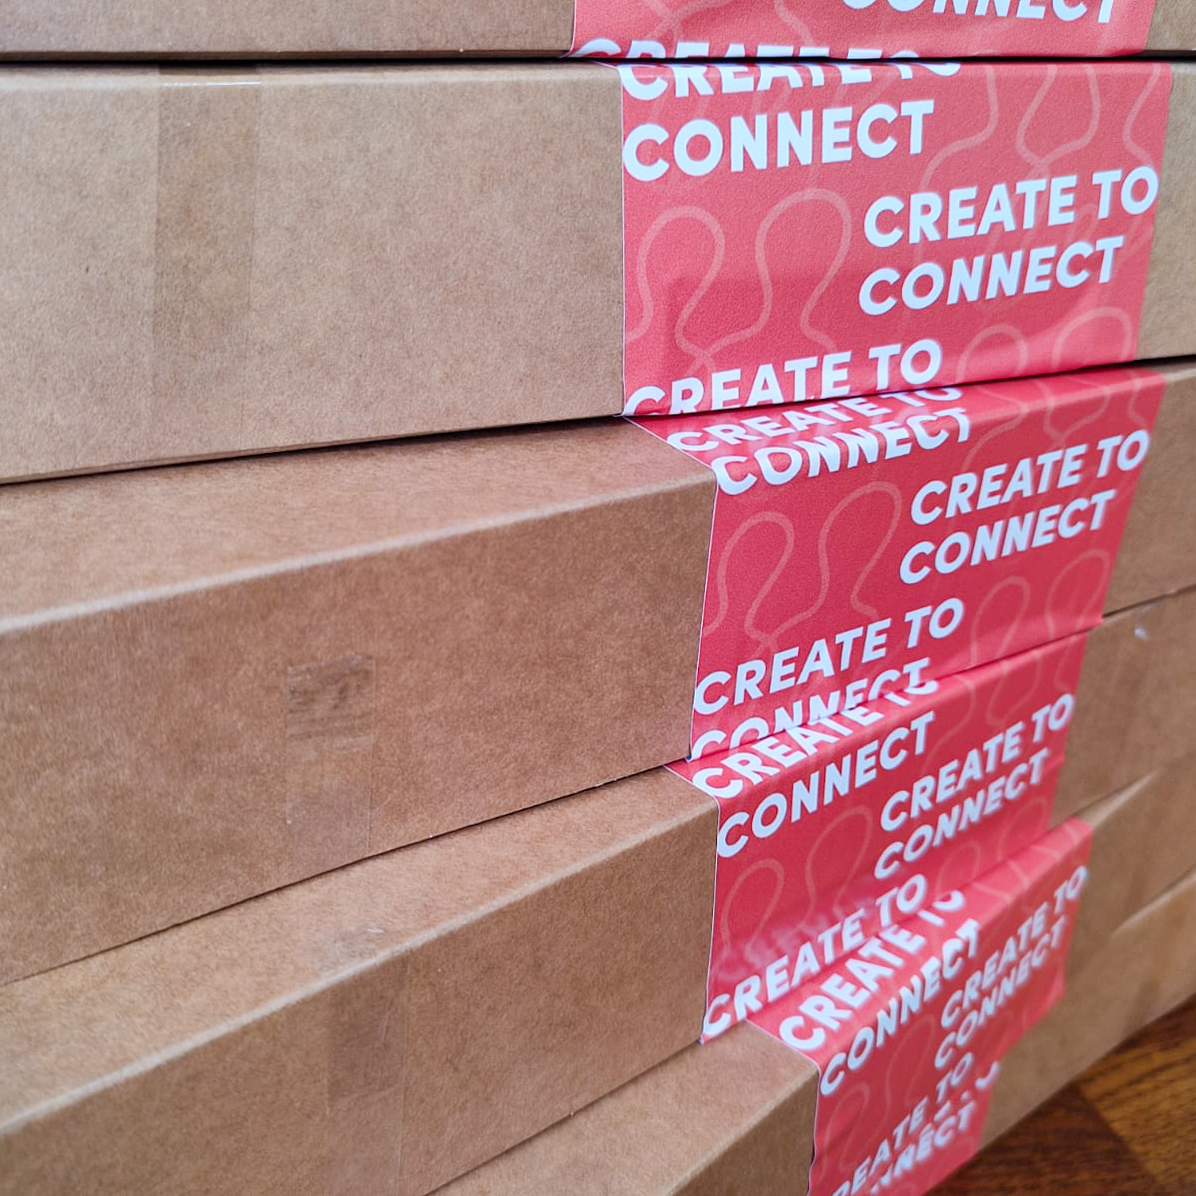 A stack of boxes with labels saing create to connect